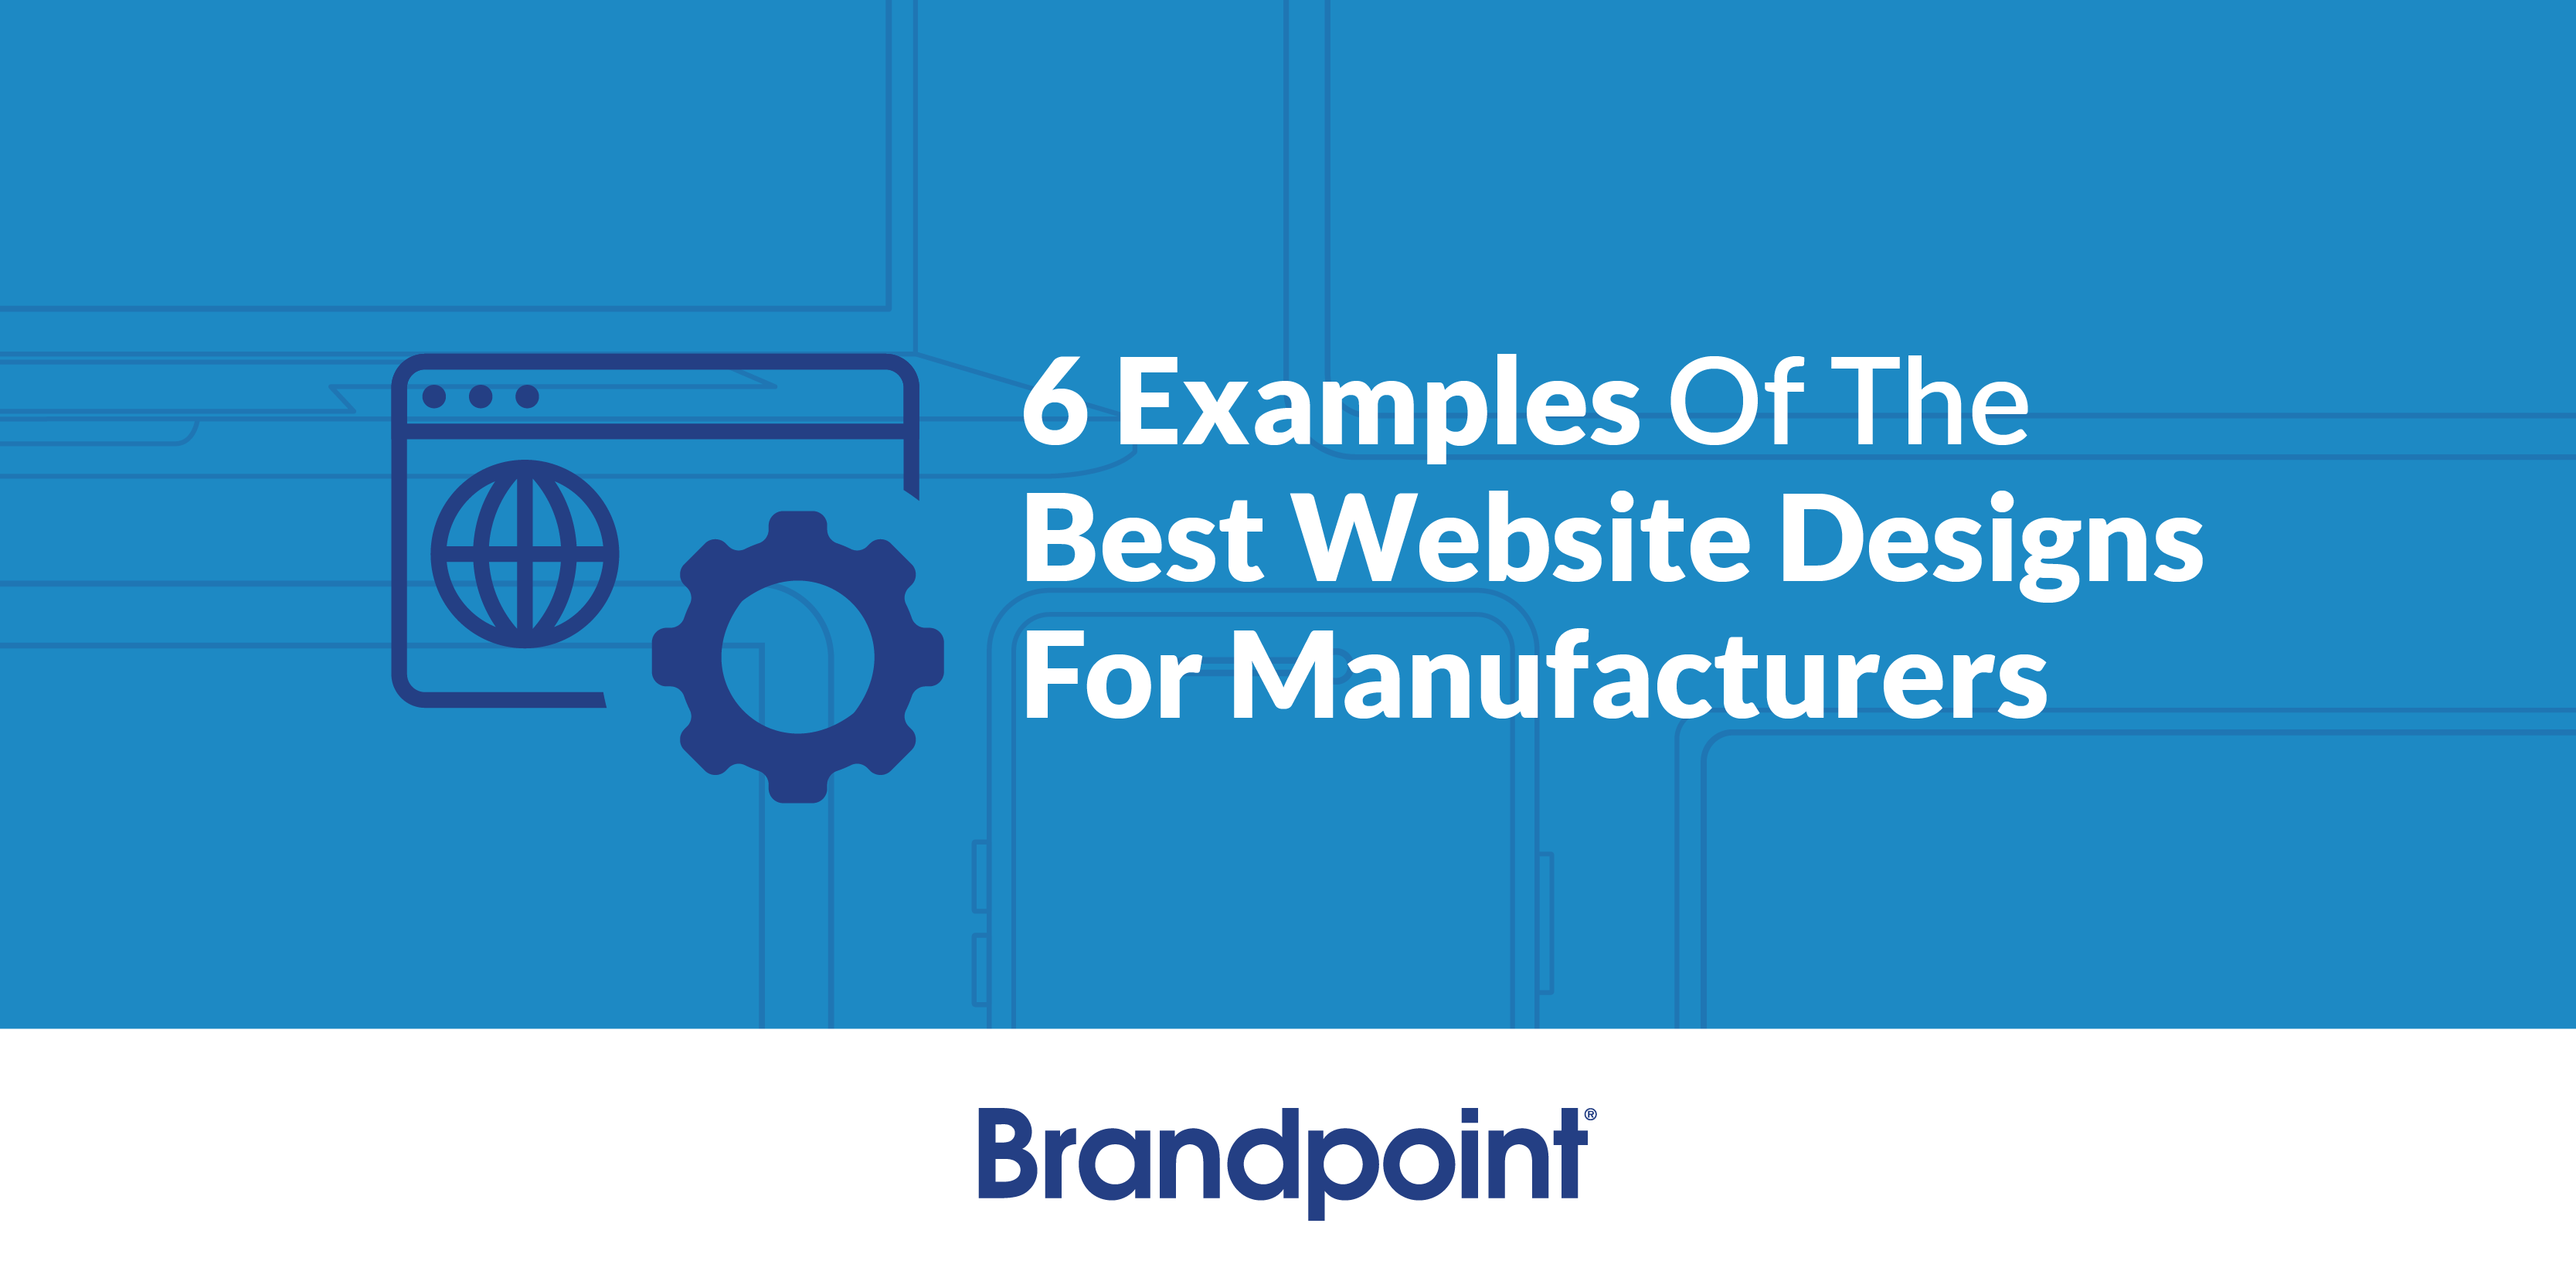 6 examples of the best website design for manufacturers